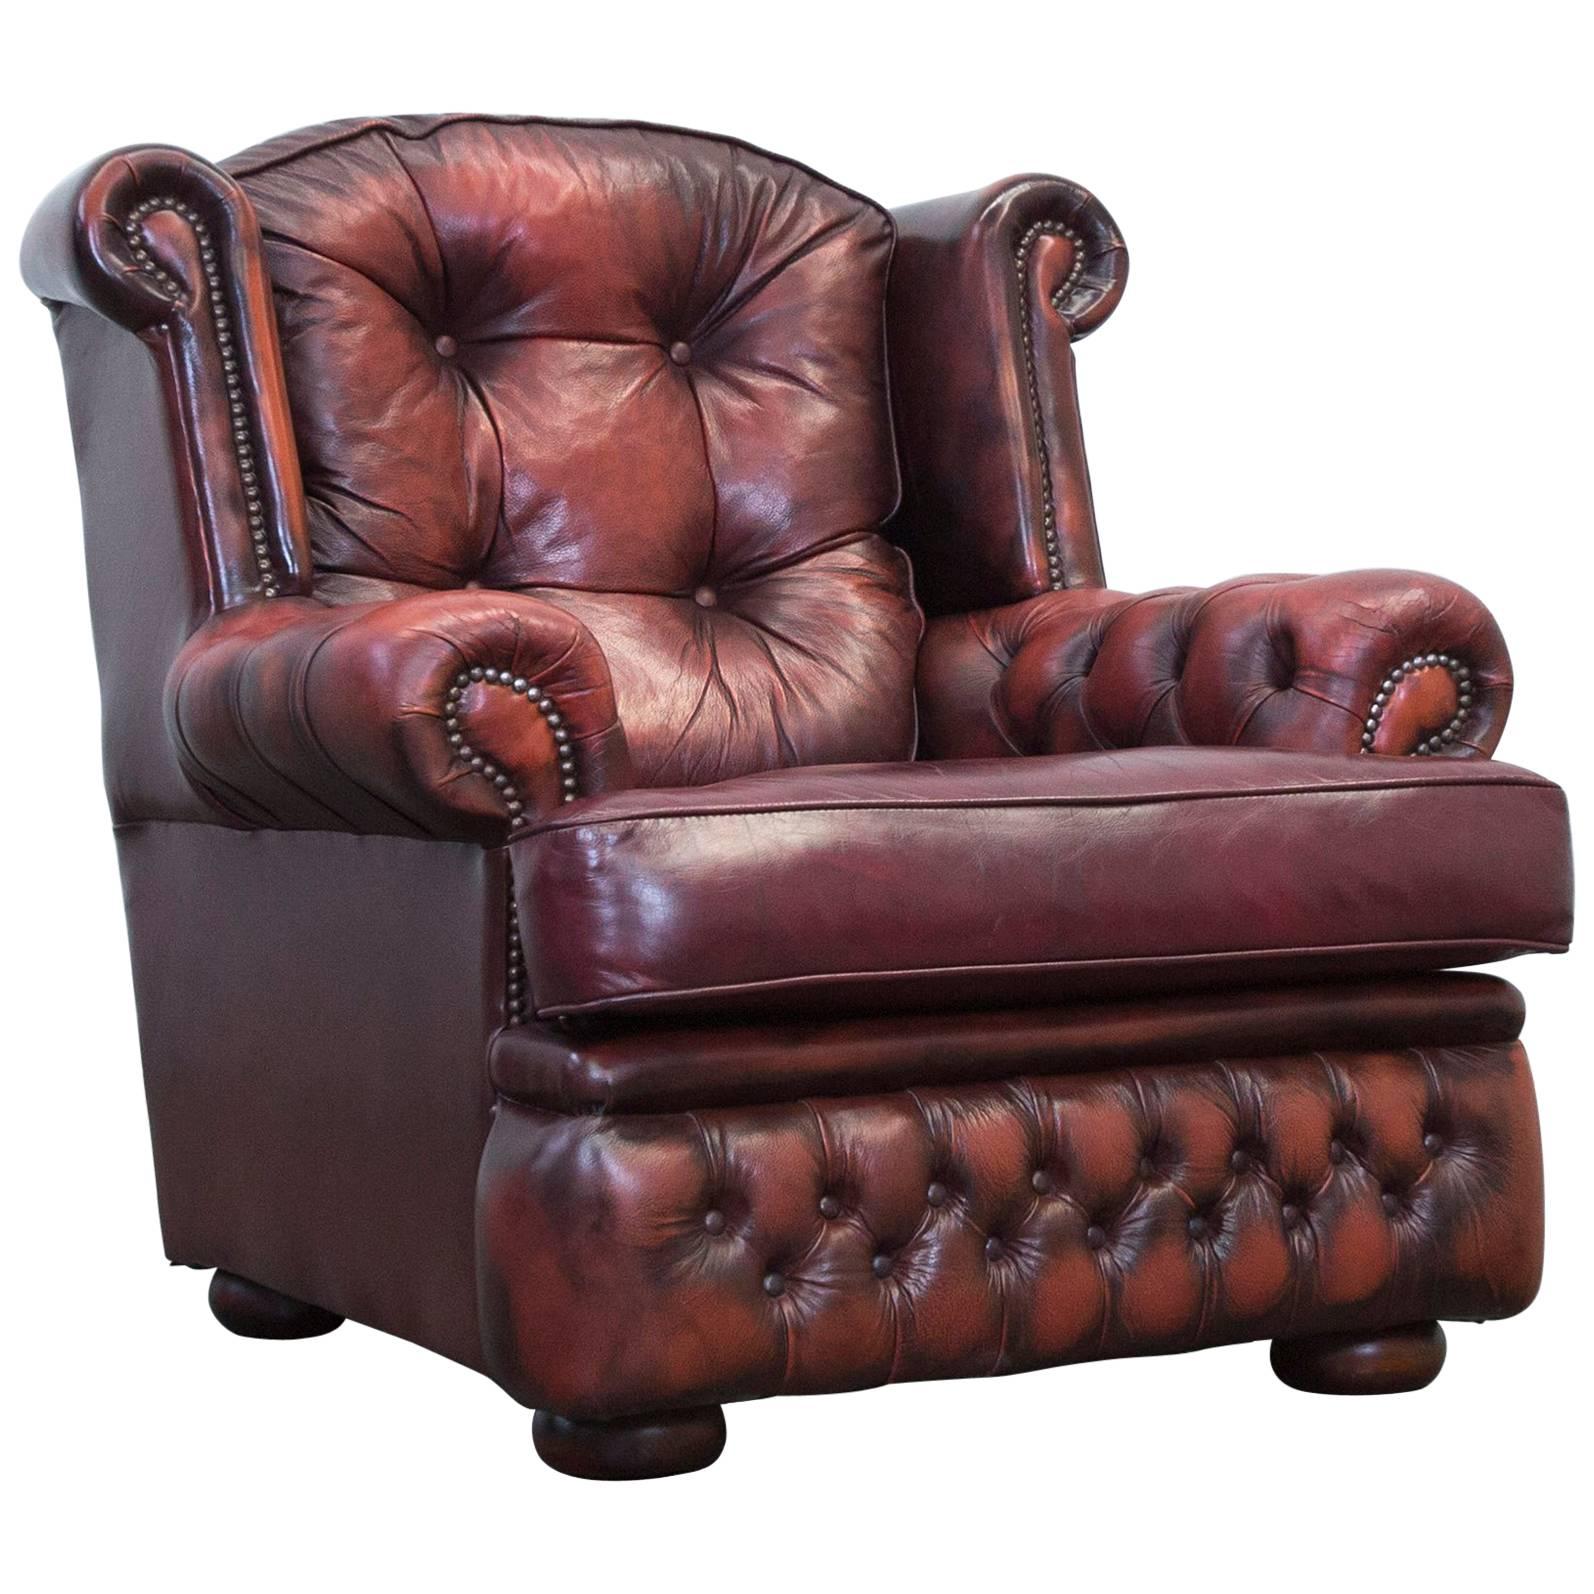 Chesterfield Leather Armchair Red Brown One Seat Chair Couch Vintage Retro